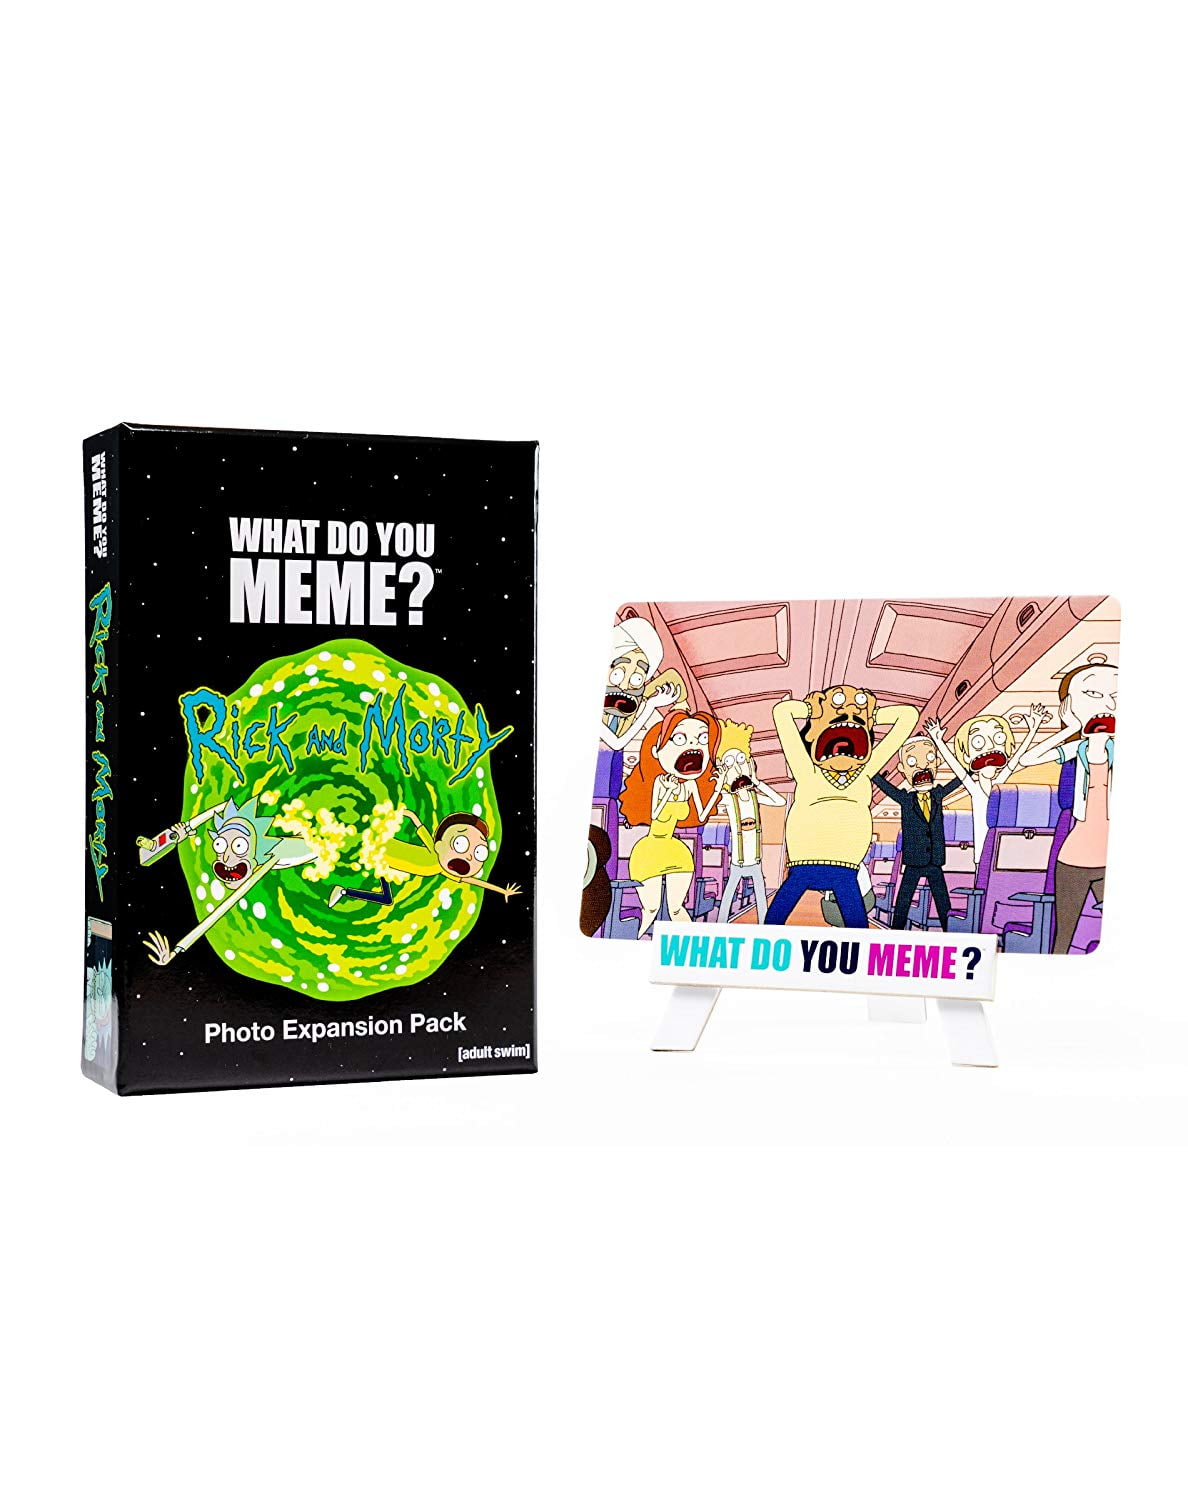 Rick and Morty Expansion Pack 75 photo cards New Sealed WHAT DO YOU MEME 